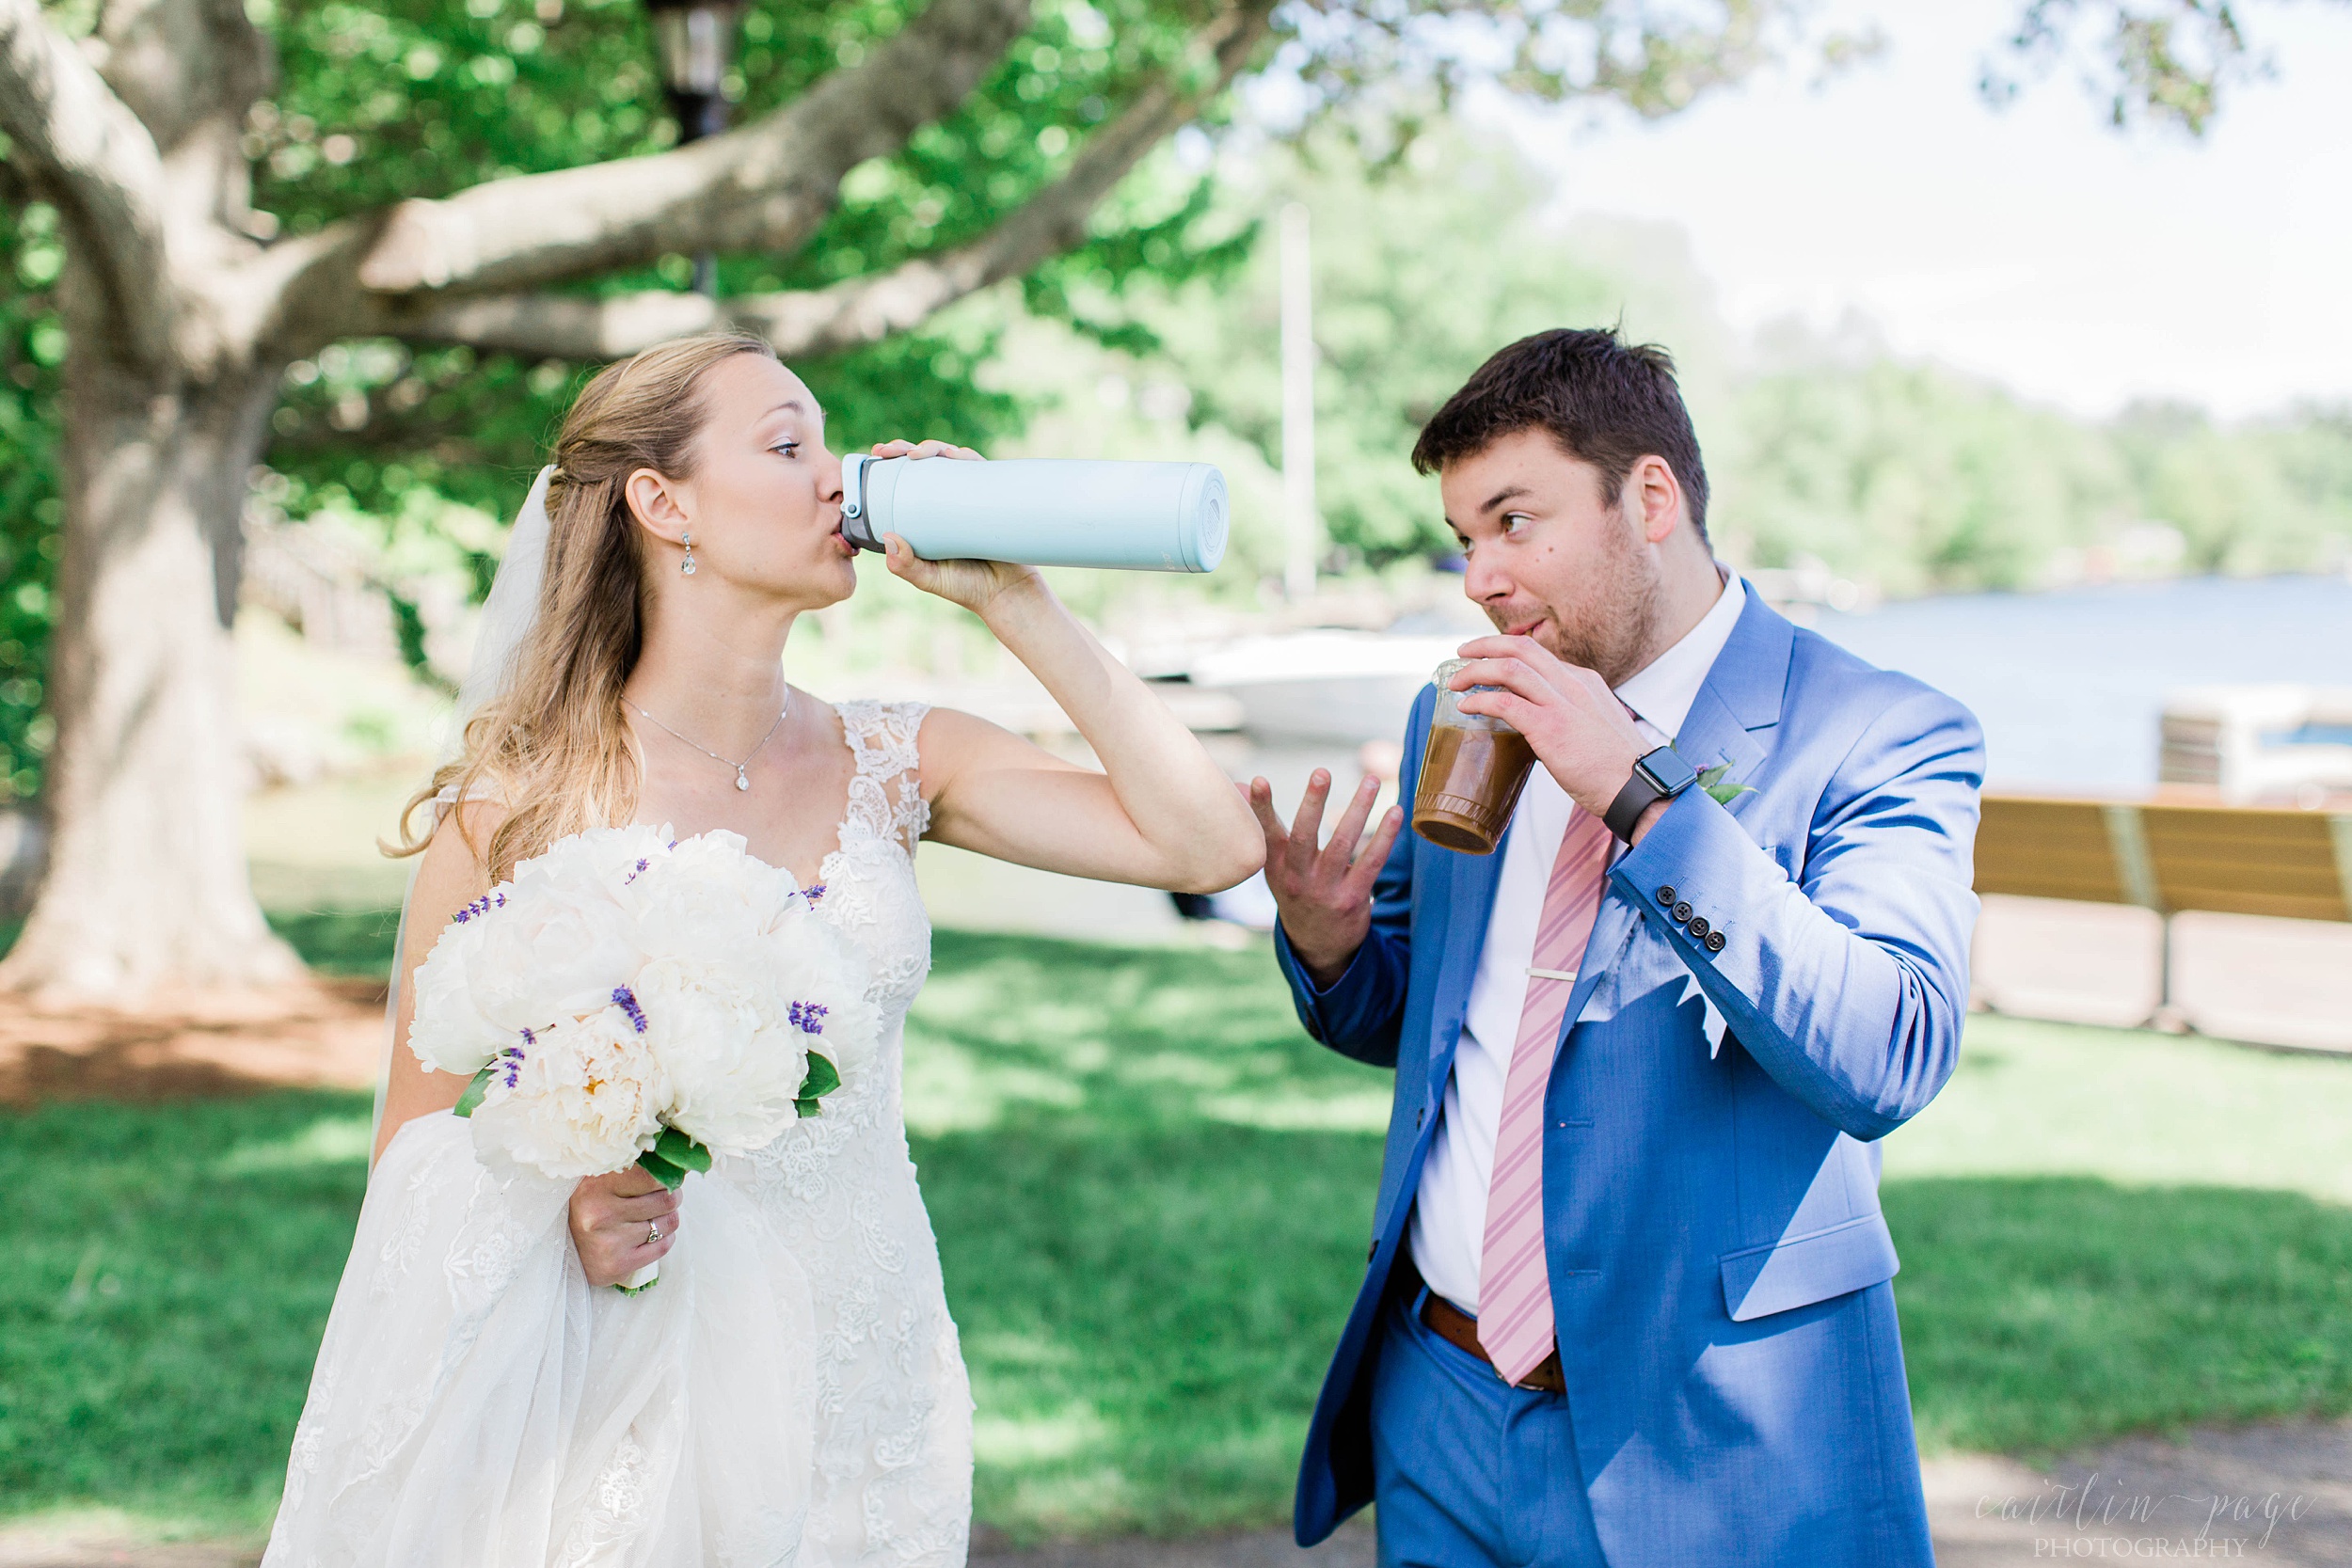 Bride and groom drinking cold drinks on wedding day